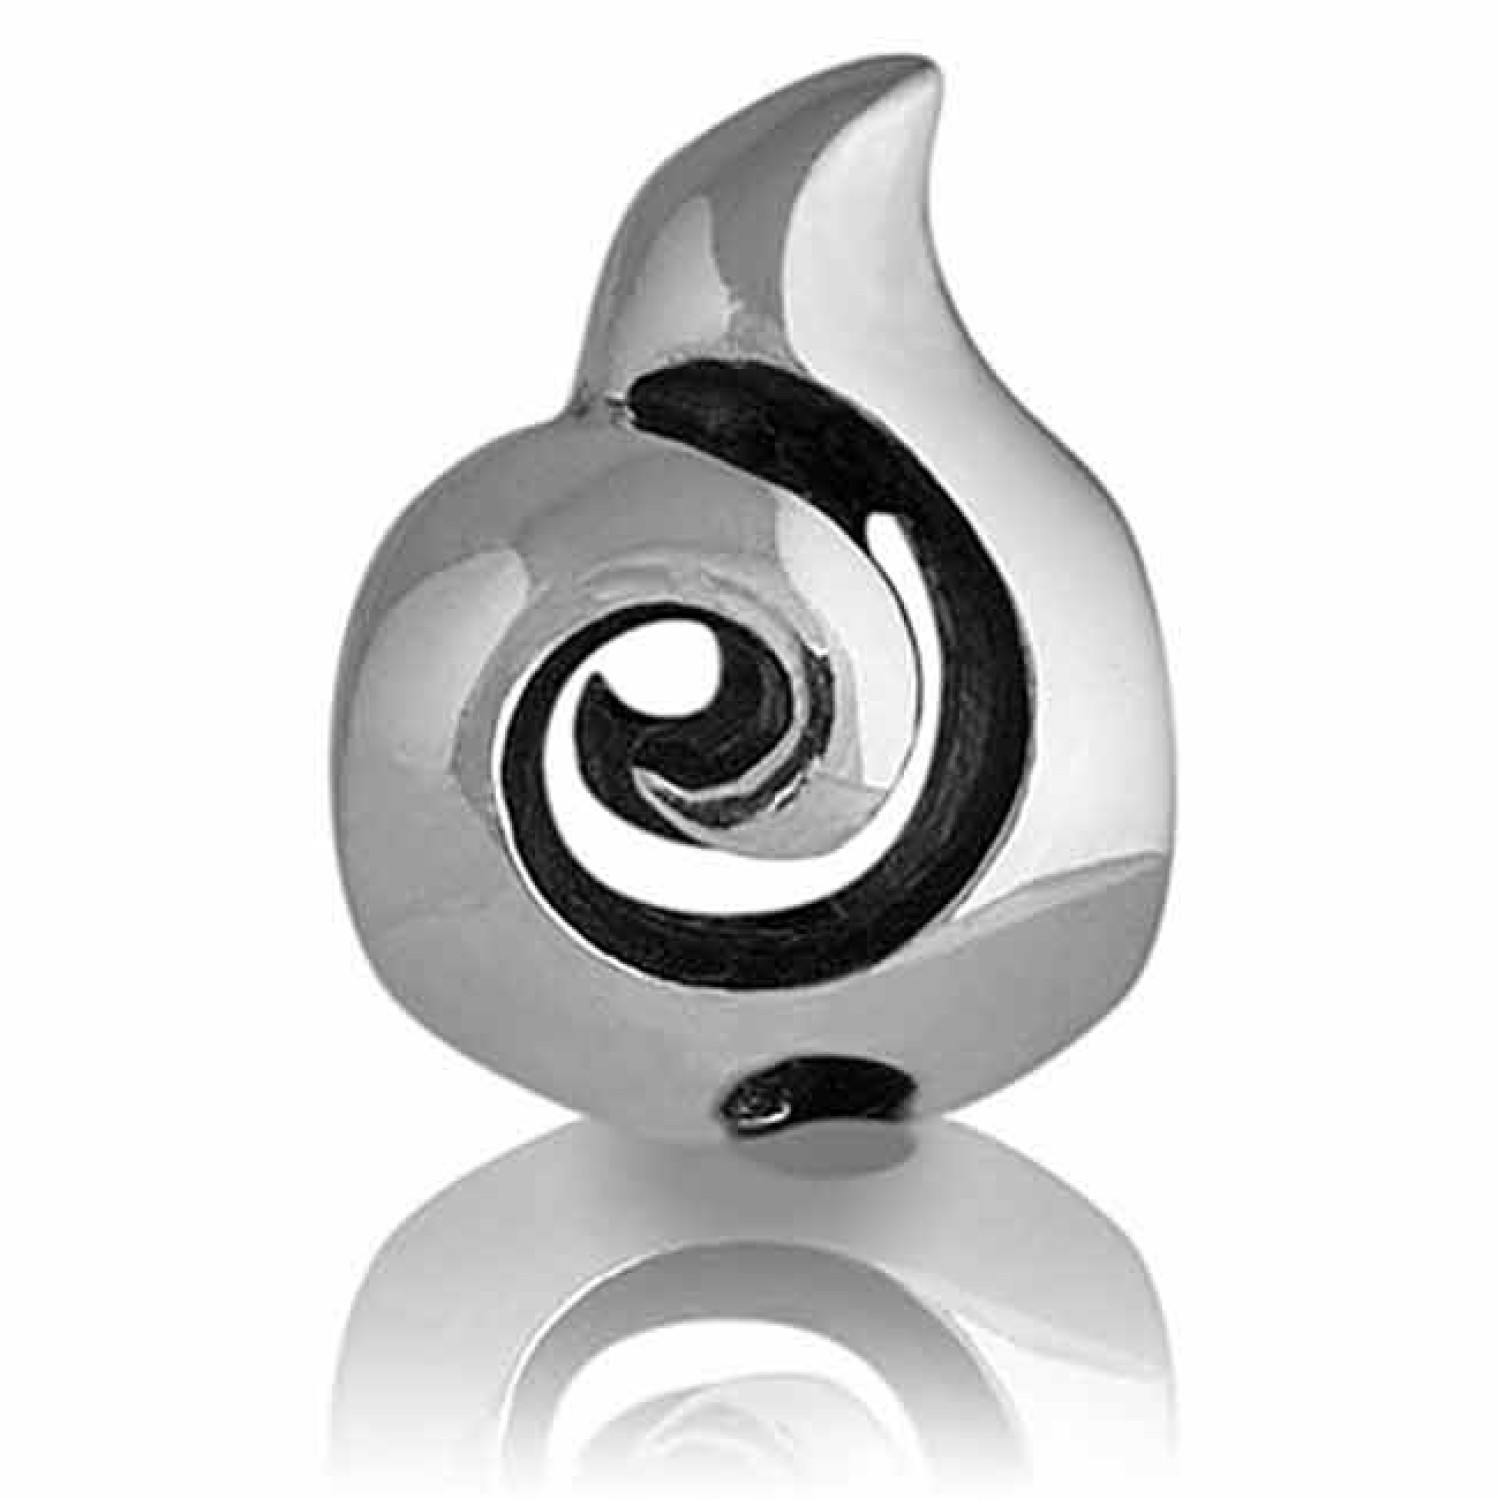 LK006 Evolve NZ Koru Growth Charm. Evolve Jewellery NZ Koru Charm The Evolve Koru Charm represents the new, unfurling silver fern frond and is widely recognised as a symbol of new life, growth, strength and peace.  This Evolve charm has special signi @chr